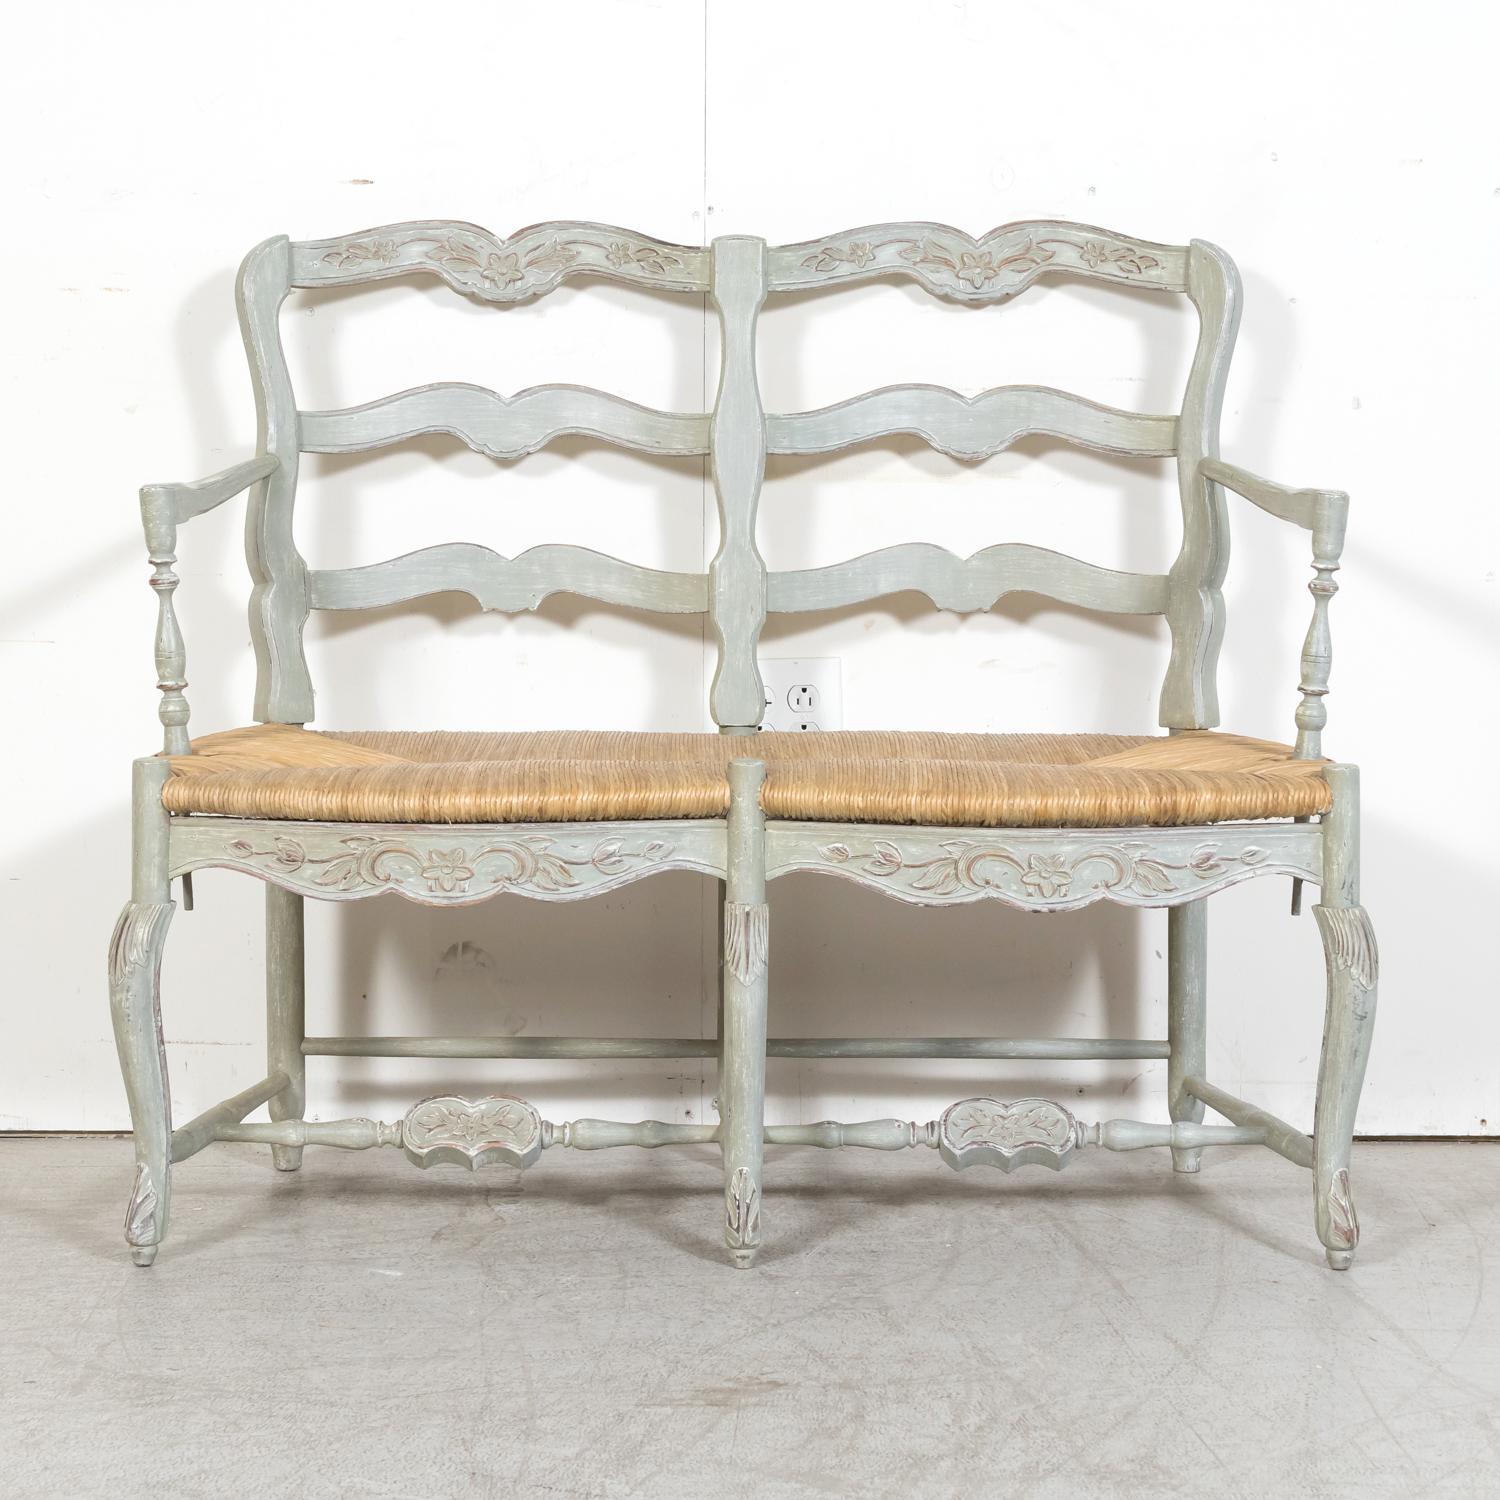 An antique French Louis XV style carved settee or radassier from Provence, circa 1920s. Having a classic French Country ladder back design, this Provençal bench is painted a beautiful bluish green color and features traditional floral and foliate